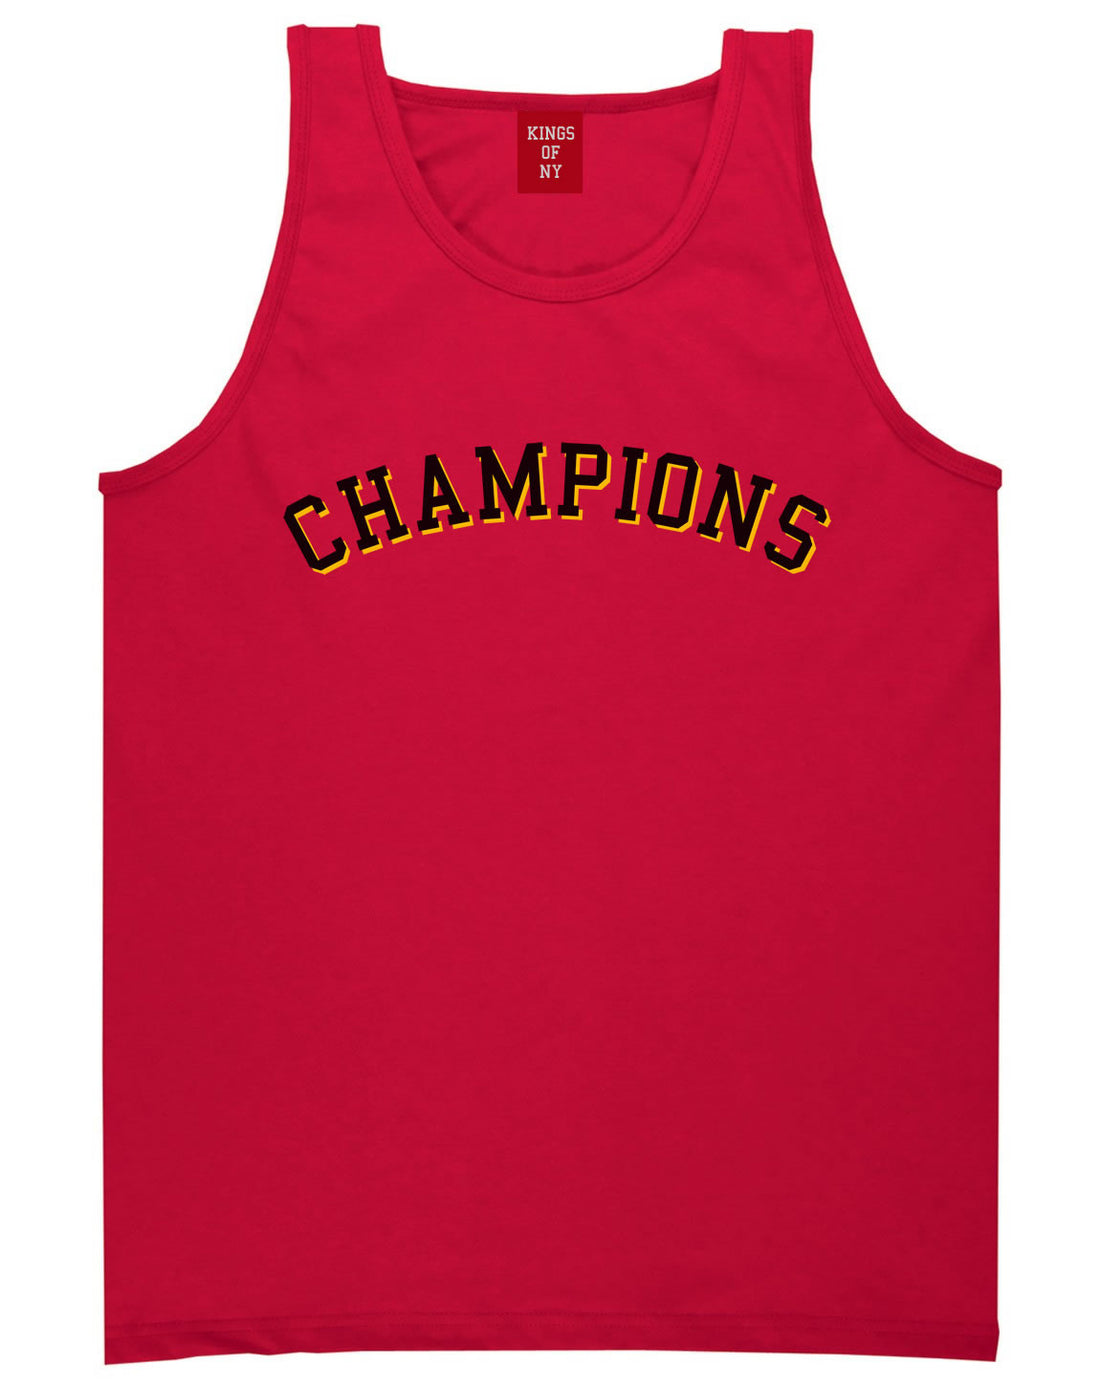 Champions Tank Top in Red by Kings Of NY